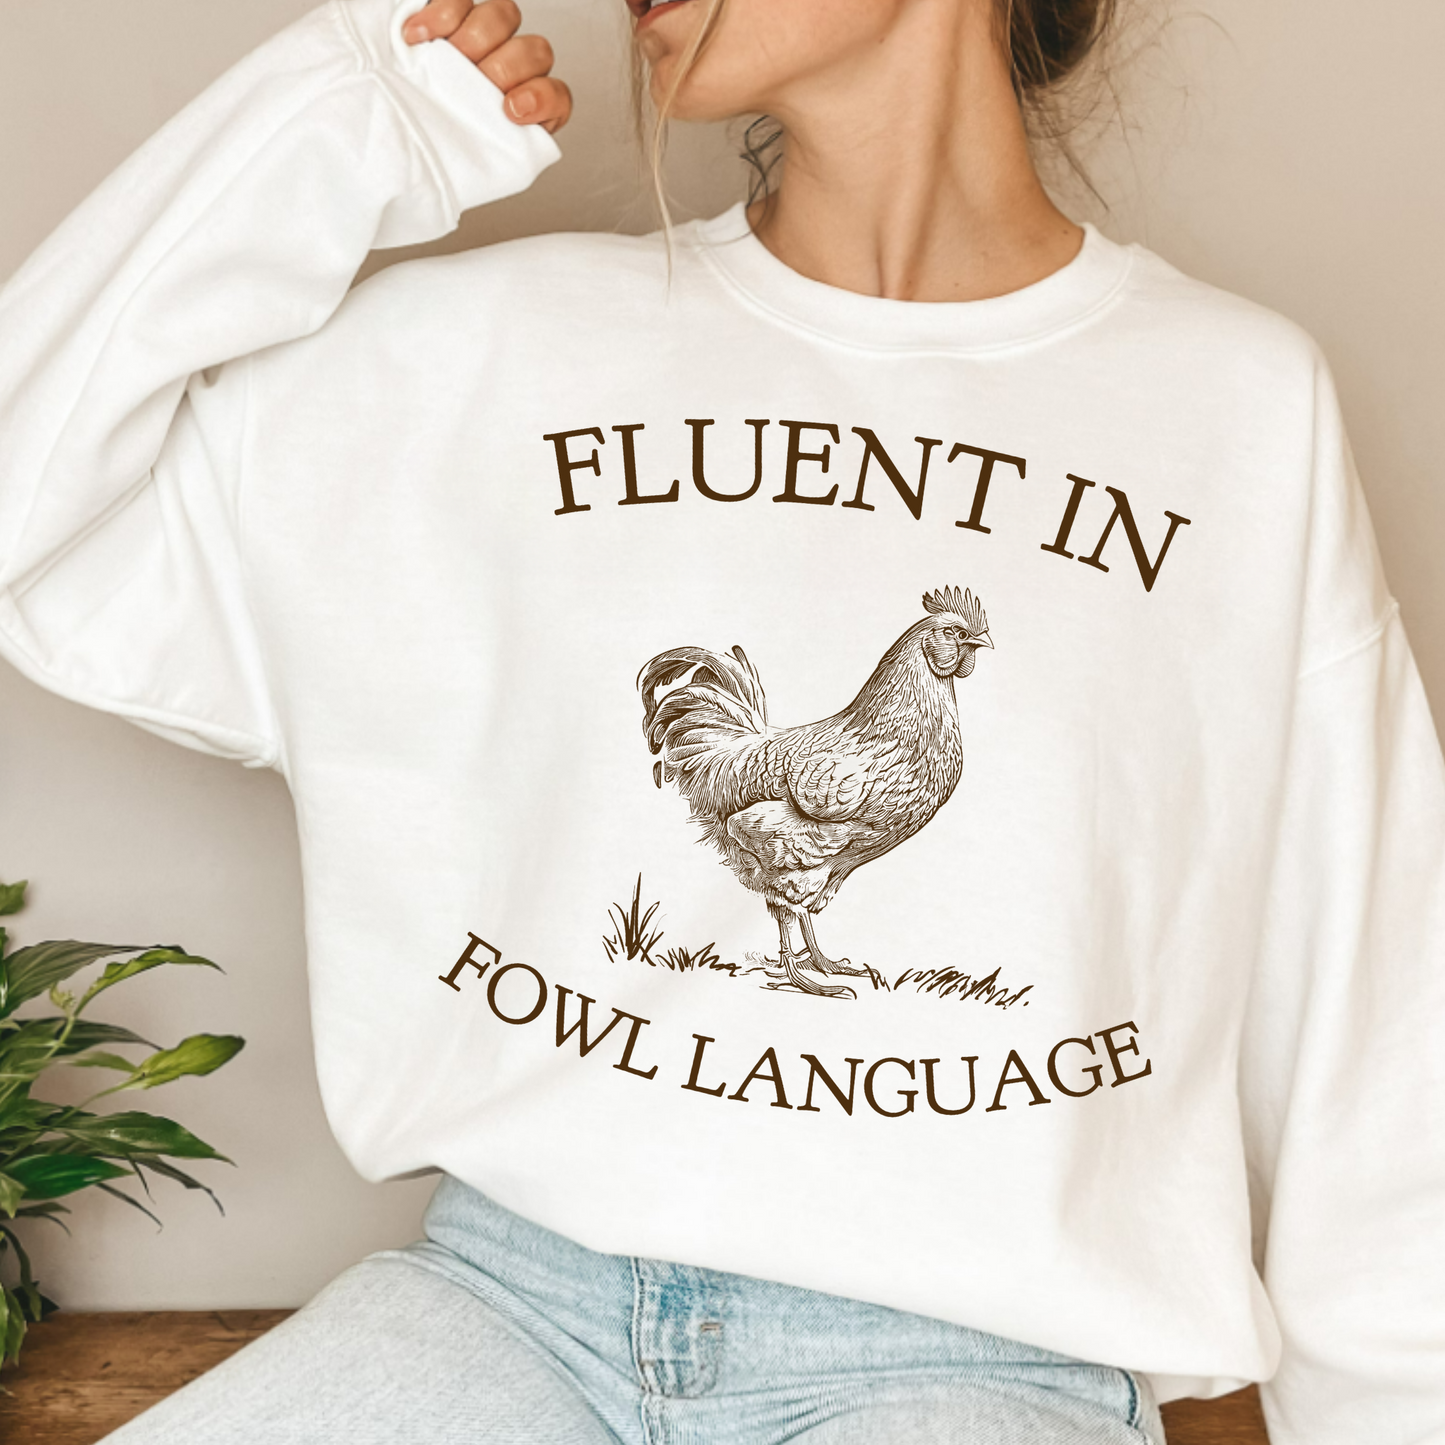 (Shirt not included) Fluent in Fowl Language - Dark Brown  Screen print Transfer